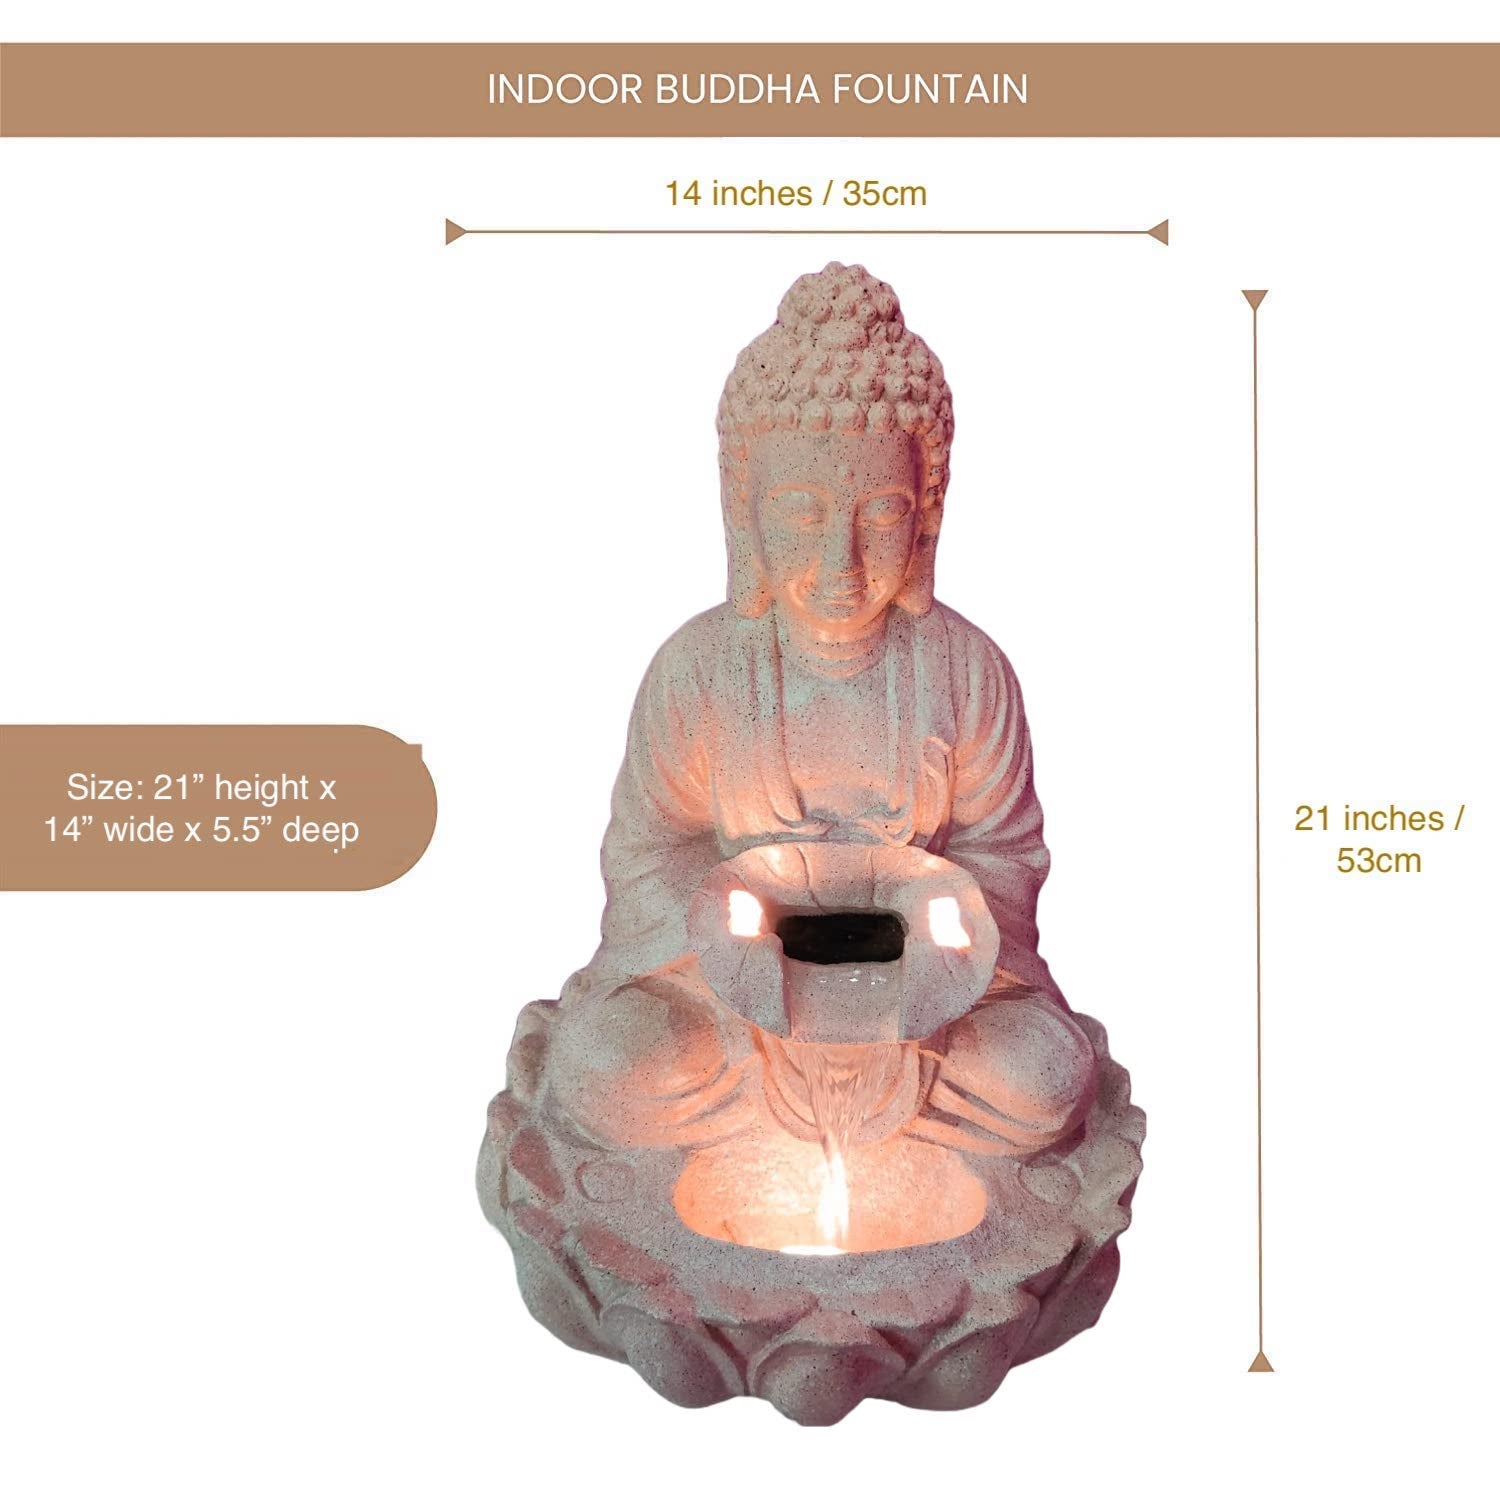 Water Fountain ALiLA Copy of Kamal Buddha Idol Table Top Water Fall Fountain with LED Lights Home Decor Decoration  Indoor Outdoor Gift Gifting Items, 21 inches Water Fountain